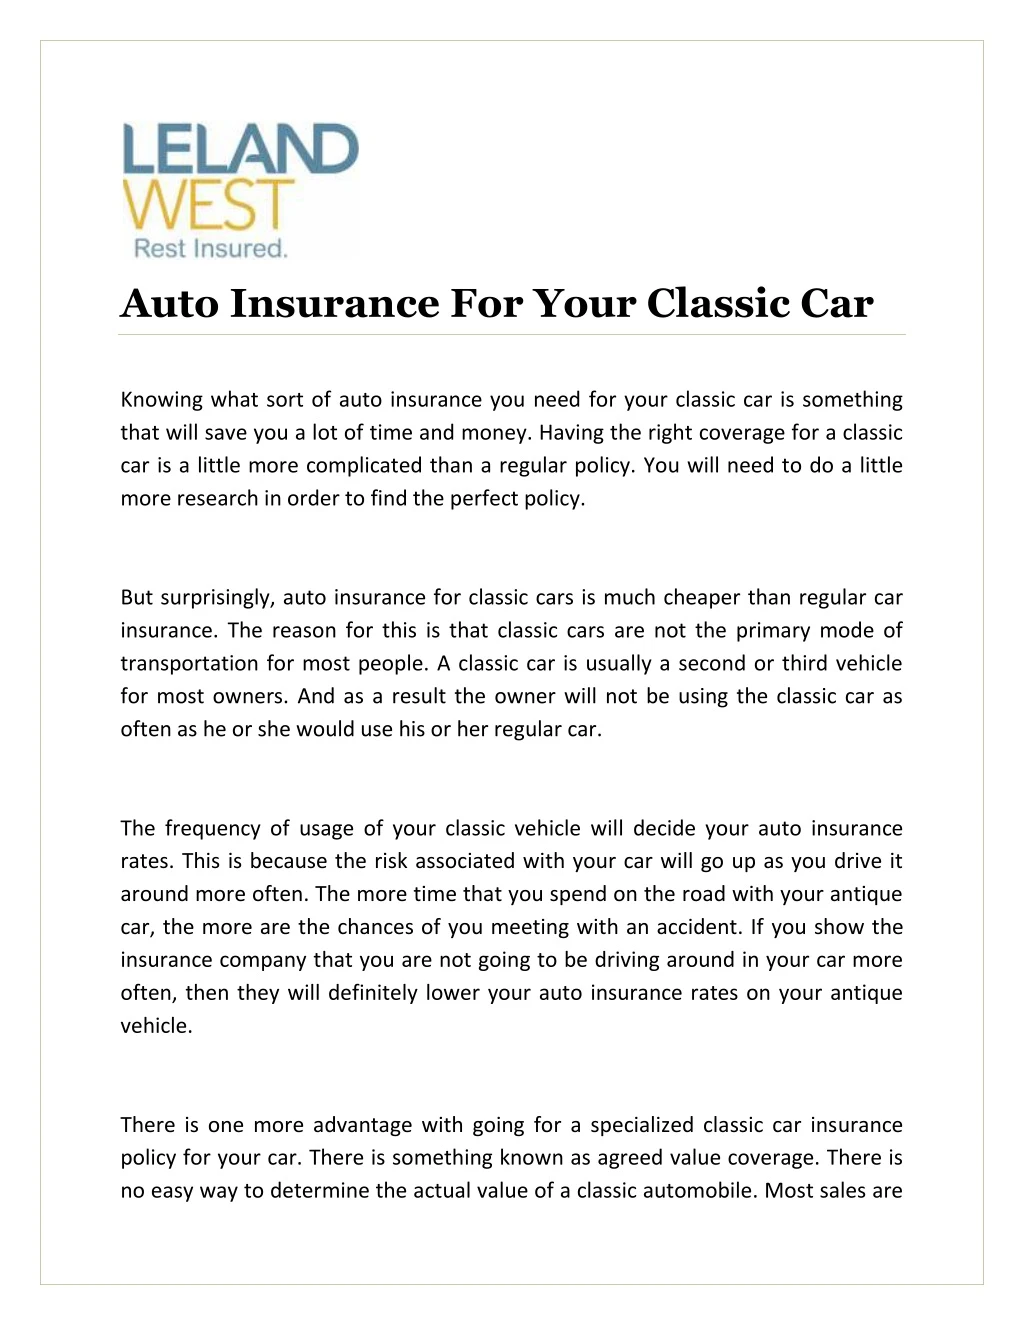 auto insurance for your classic car